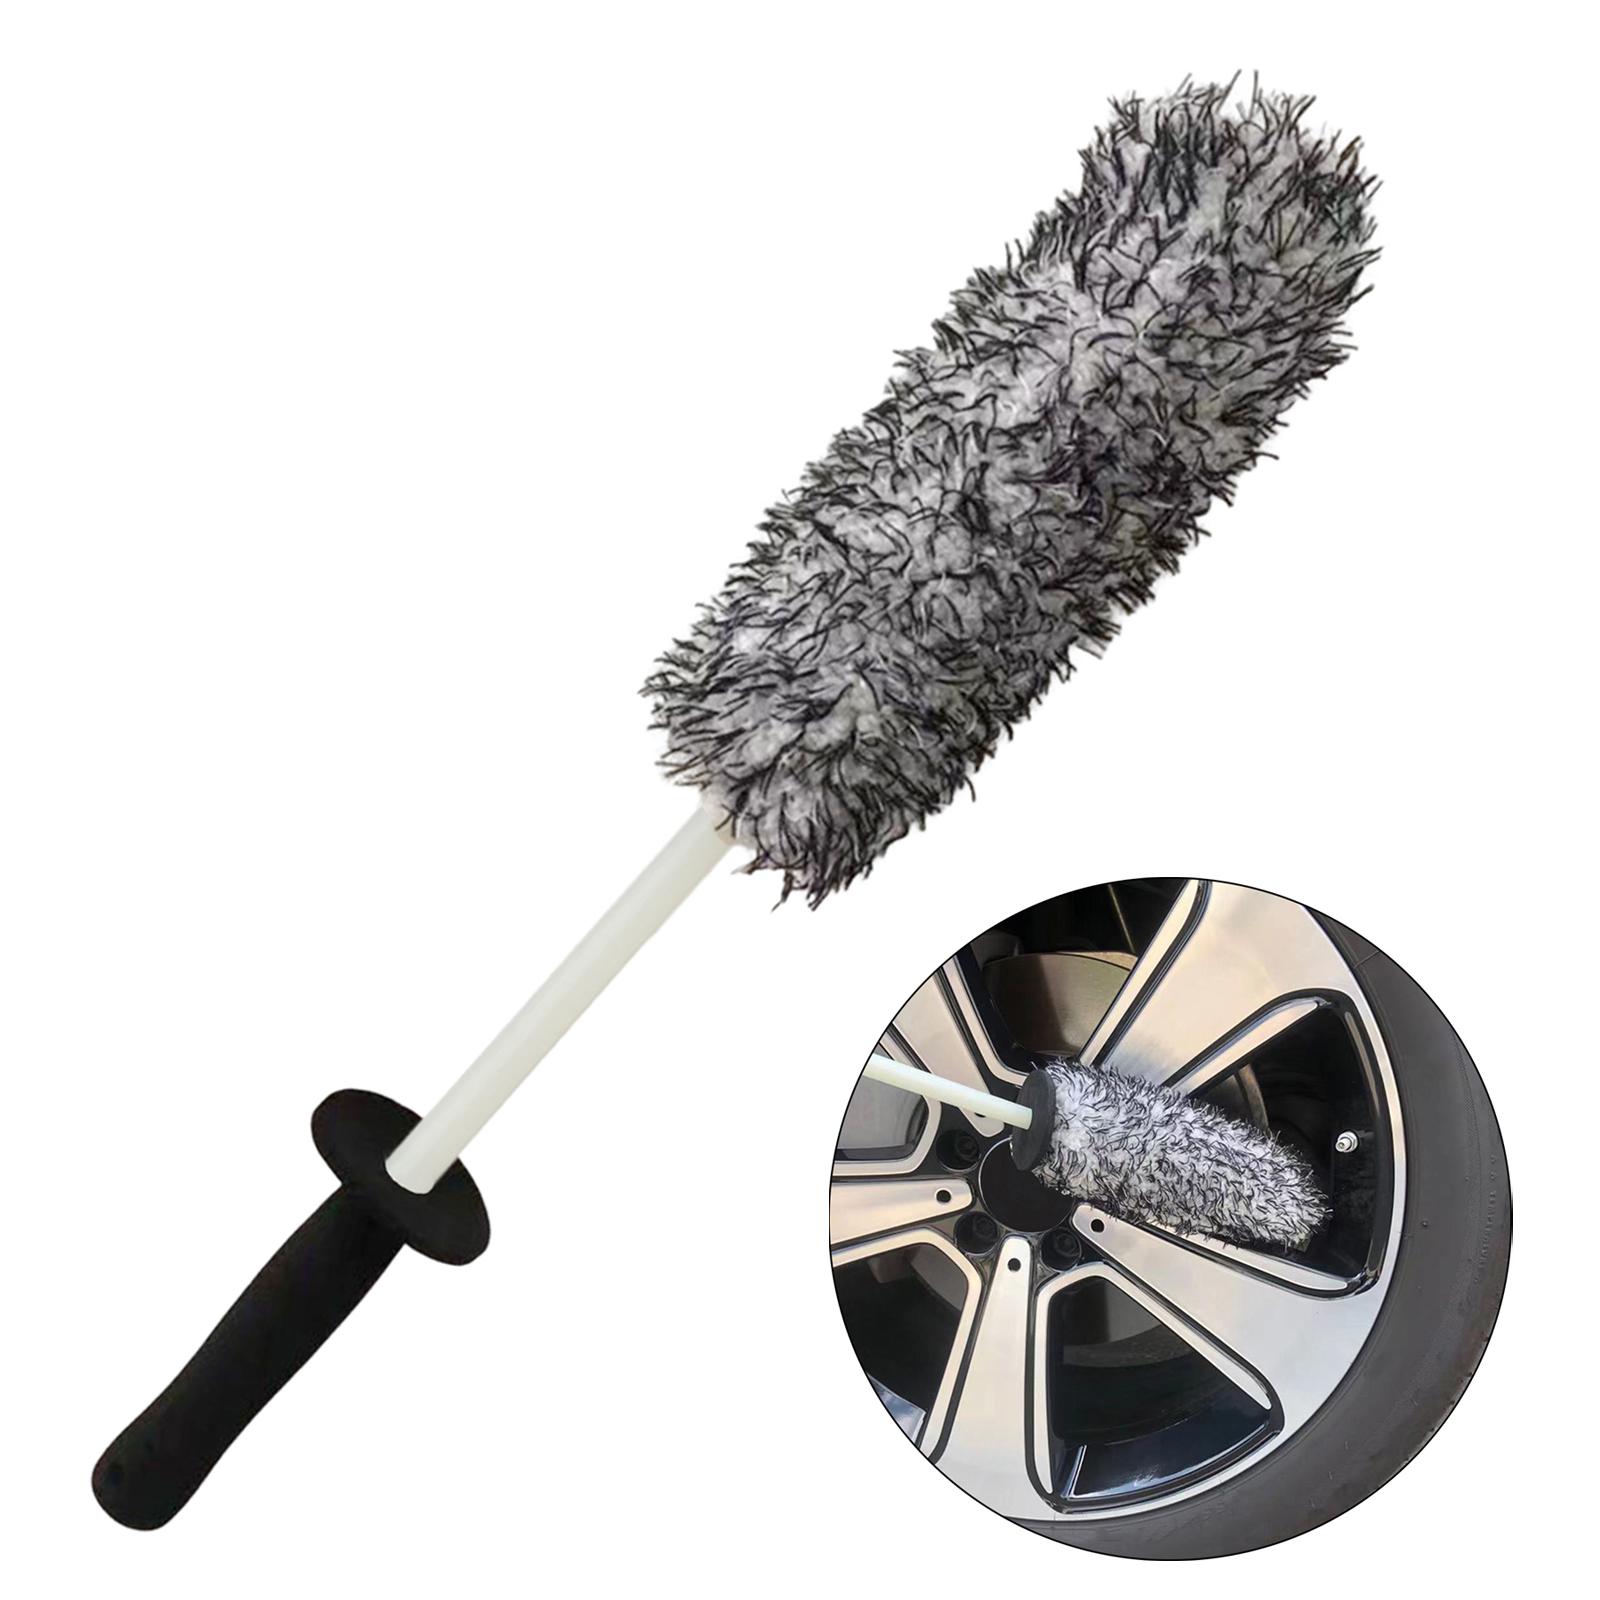 Car Wheel Rim Cleaning Brush Long Handle for Motorcycles Wheel Bike with Baffle